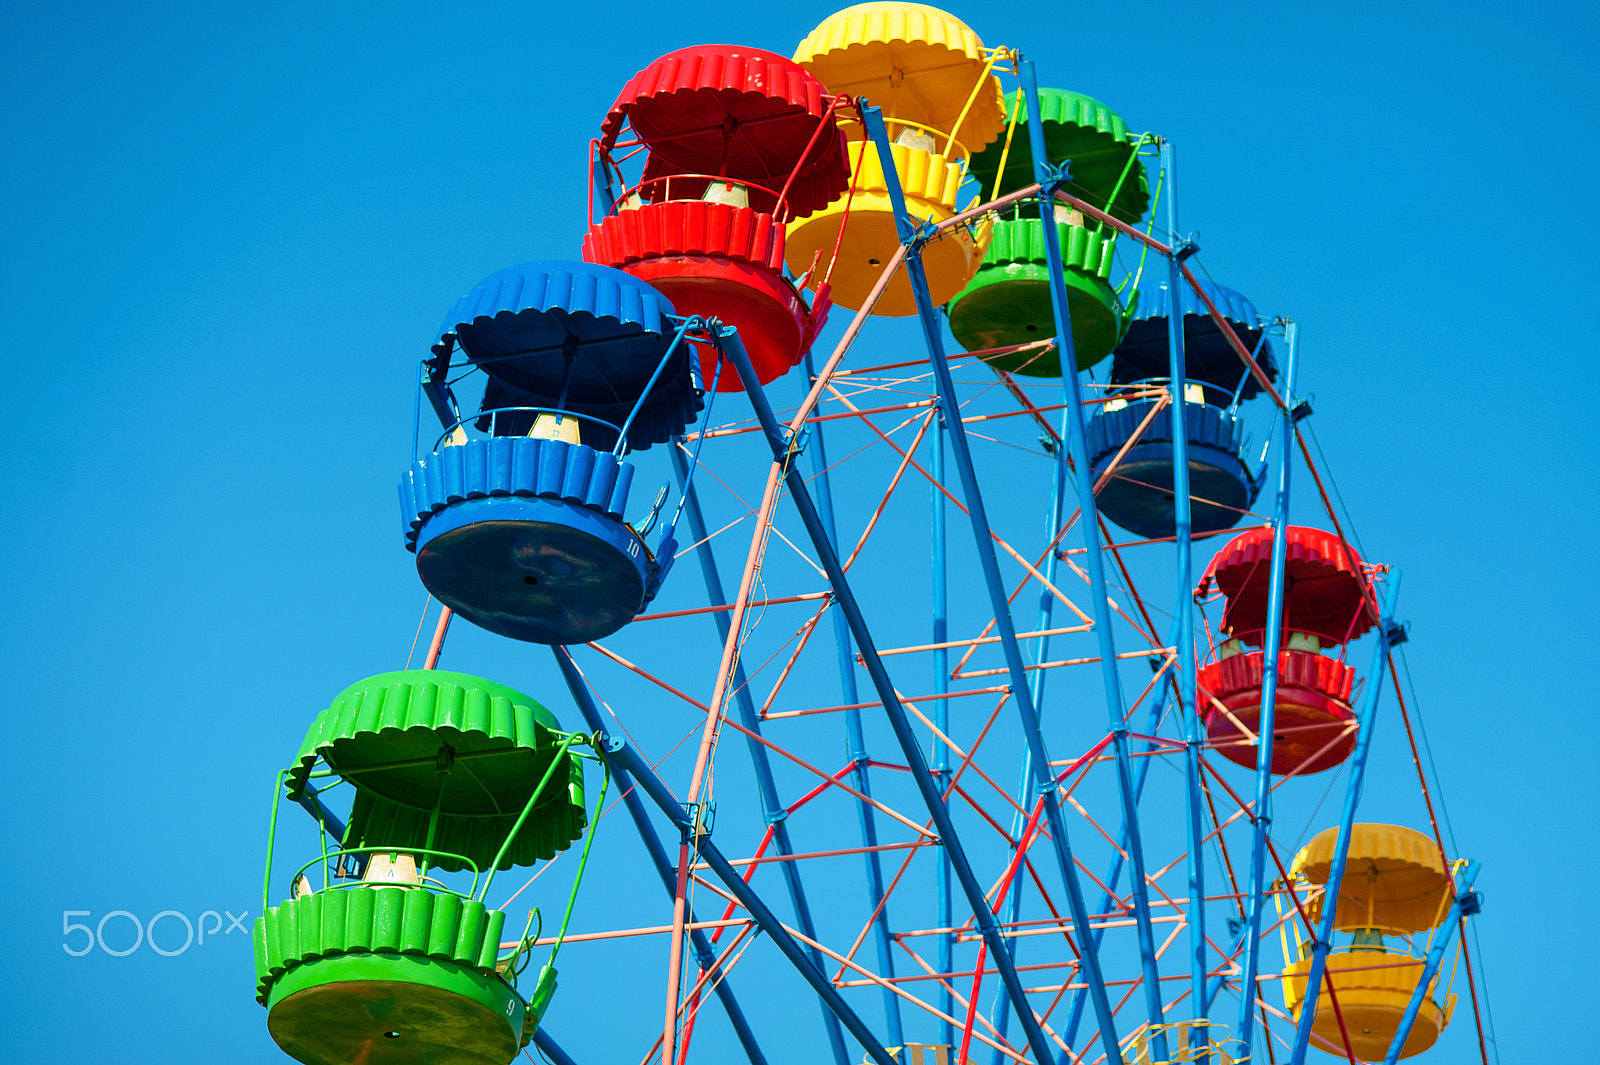 Nikon D700 sample photo. Retro colorful ferris wheel of the amusement park in the blue sky background. photography